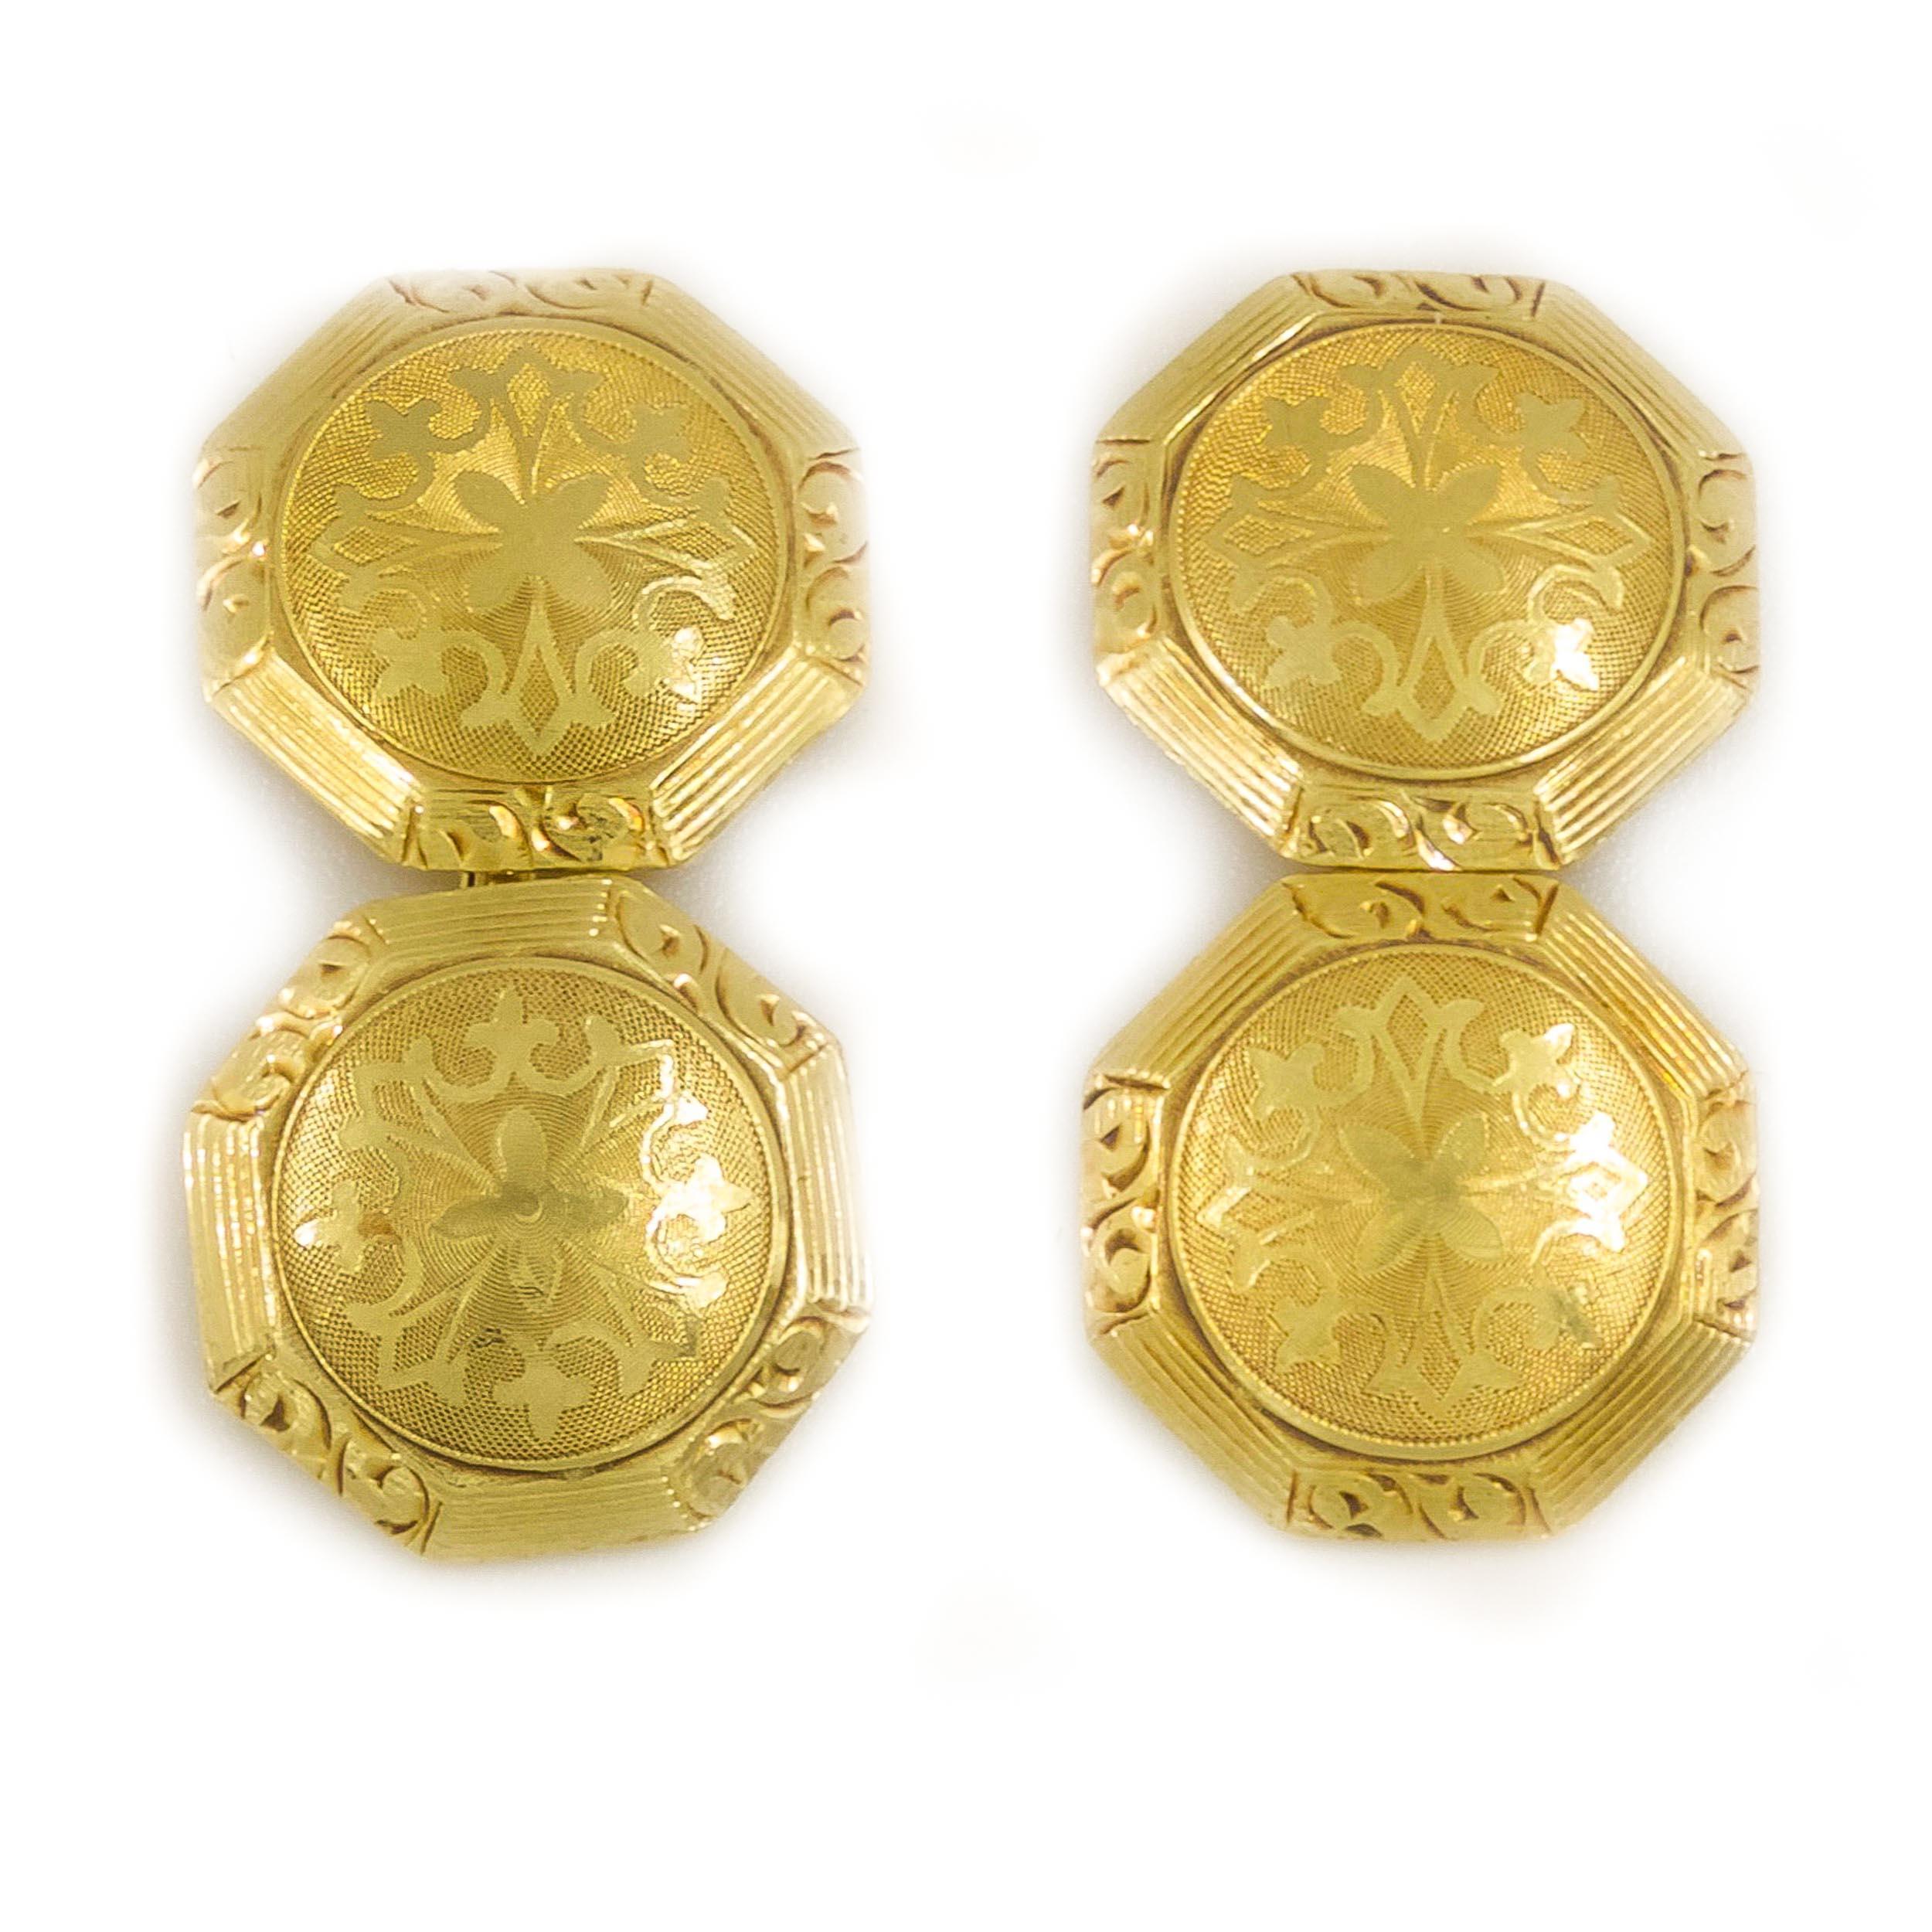 ANTIQUE PAIR OF ART DECO 14K YELLOW GOLD ENGRAVED OCTAGONAL CUFF-LINKS
Designed and retailed by Lebolt & Company, Chicago circa 1925
Item # 011DQF19P 

An exquisite and beautifully preserved pair of Lebolt & Company cuff-links crafted entirely of